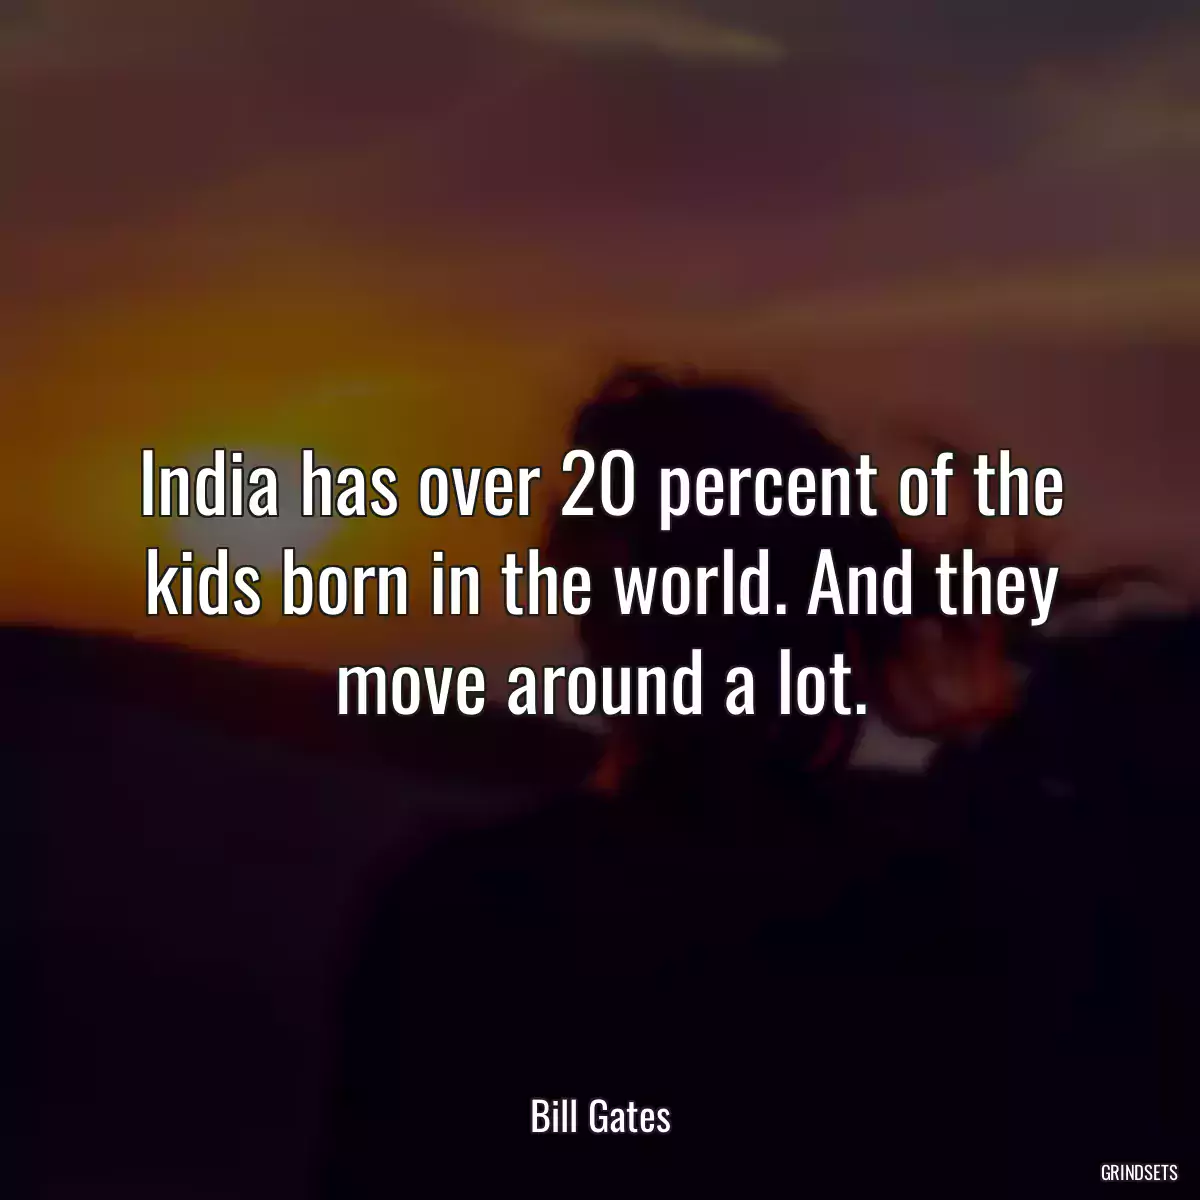 India has over 20 percent of the kids born in the world. And they move around a lot.